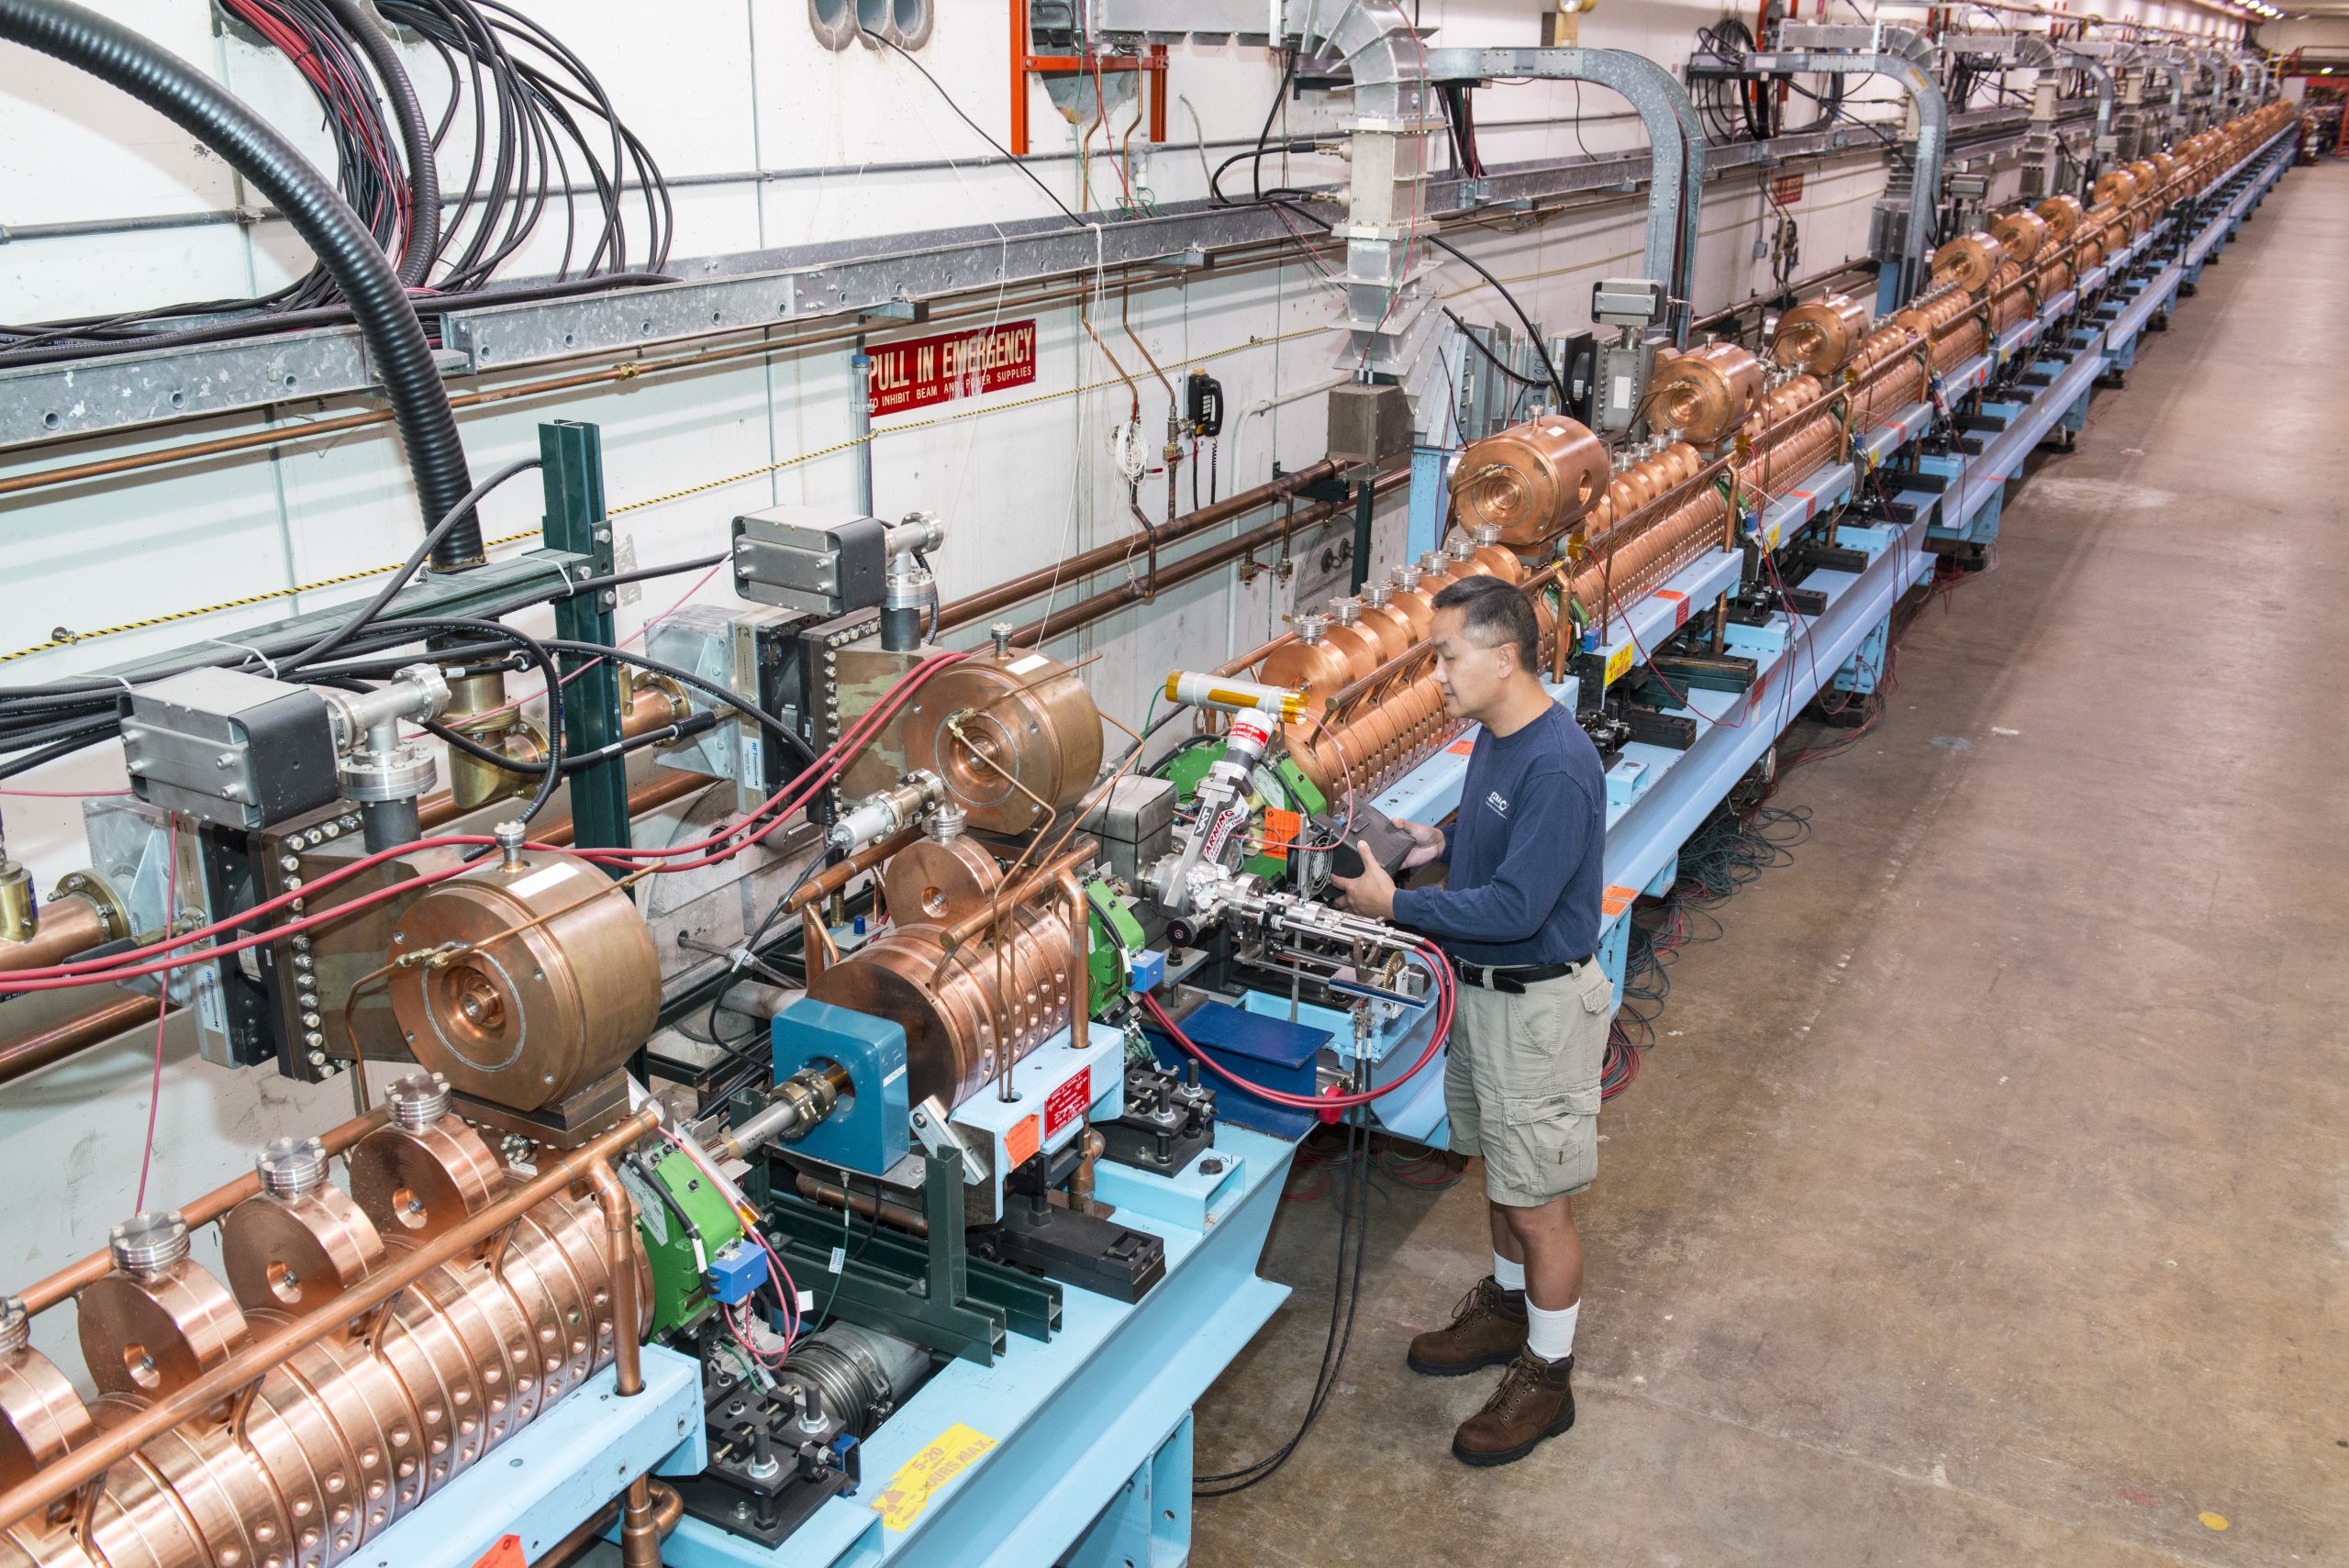 The Fermilab Linac will undergo upgrades to improve its reliability during the accelerator shutdown. Photo: Reidar Hahn